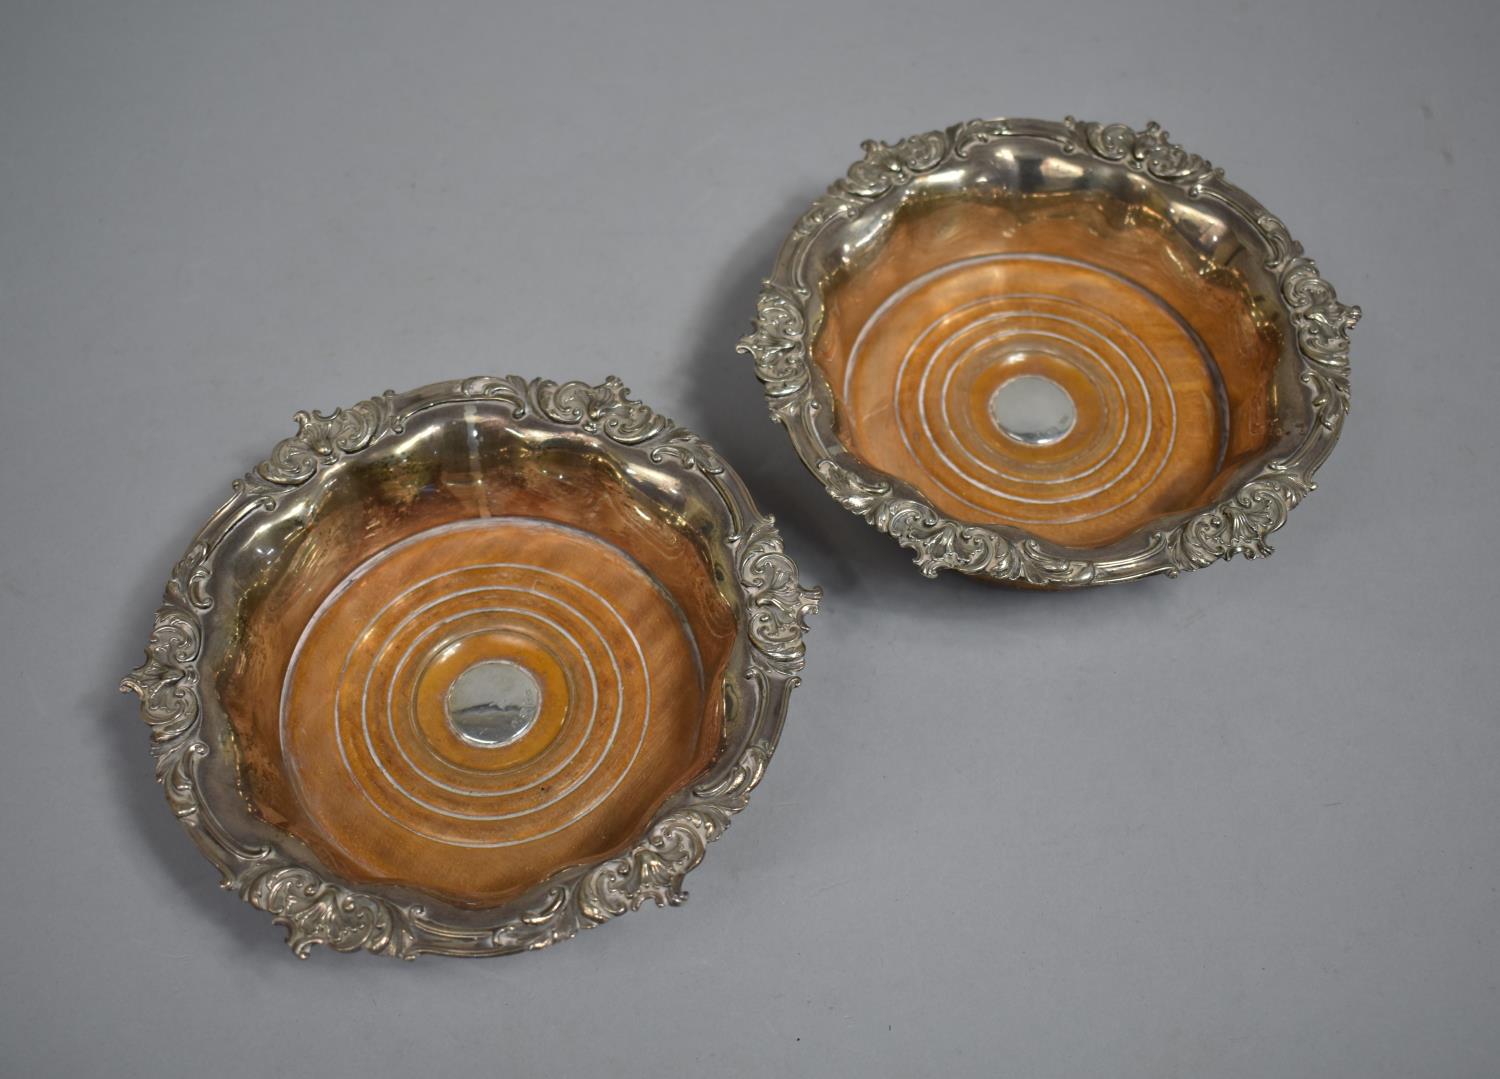 A Pair of White Metal Bottle Coasters with Relief Decorated Border and Centre Turned Section Stamped